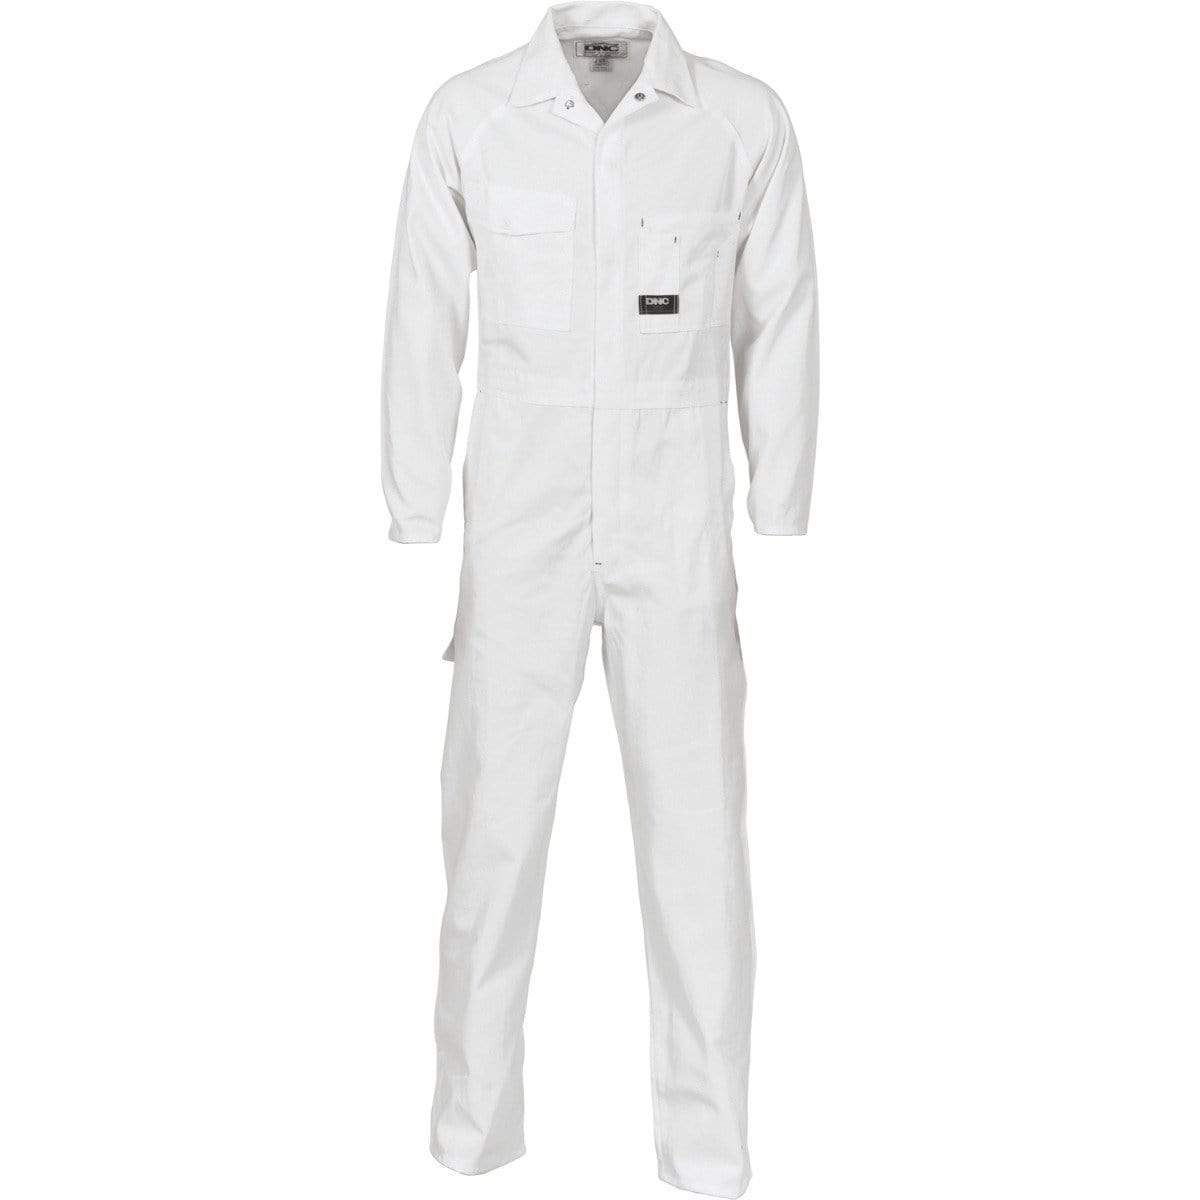 Dnc Workwear Cotton Drill Coverall - 3101 Work Wear DNC Workwear White 77R 